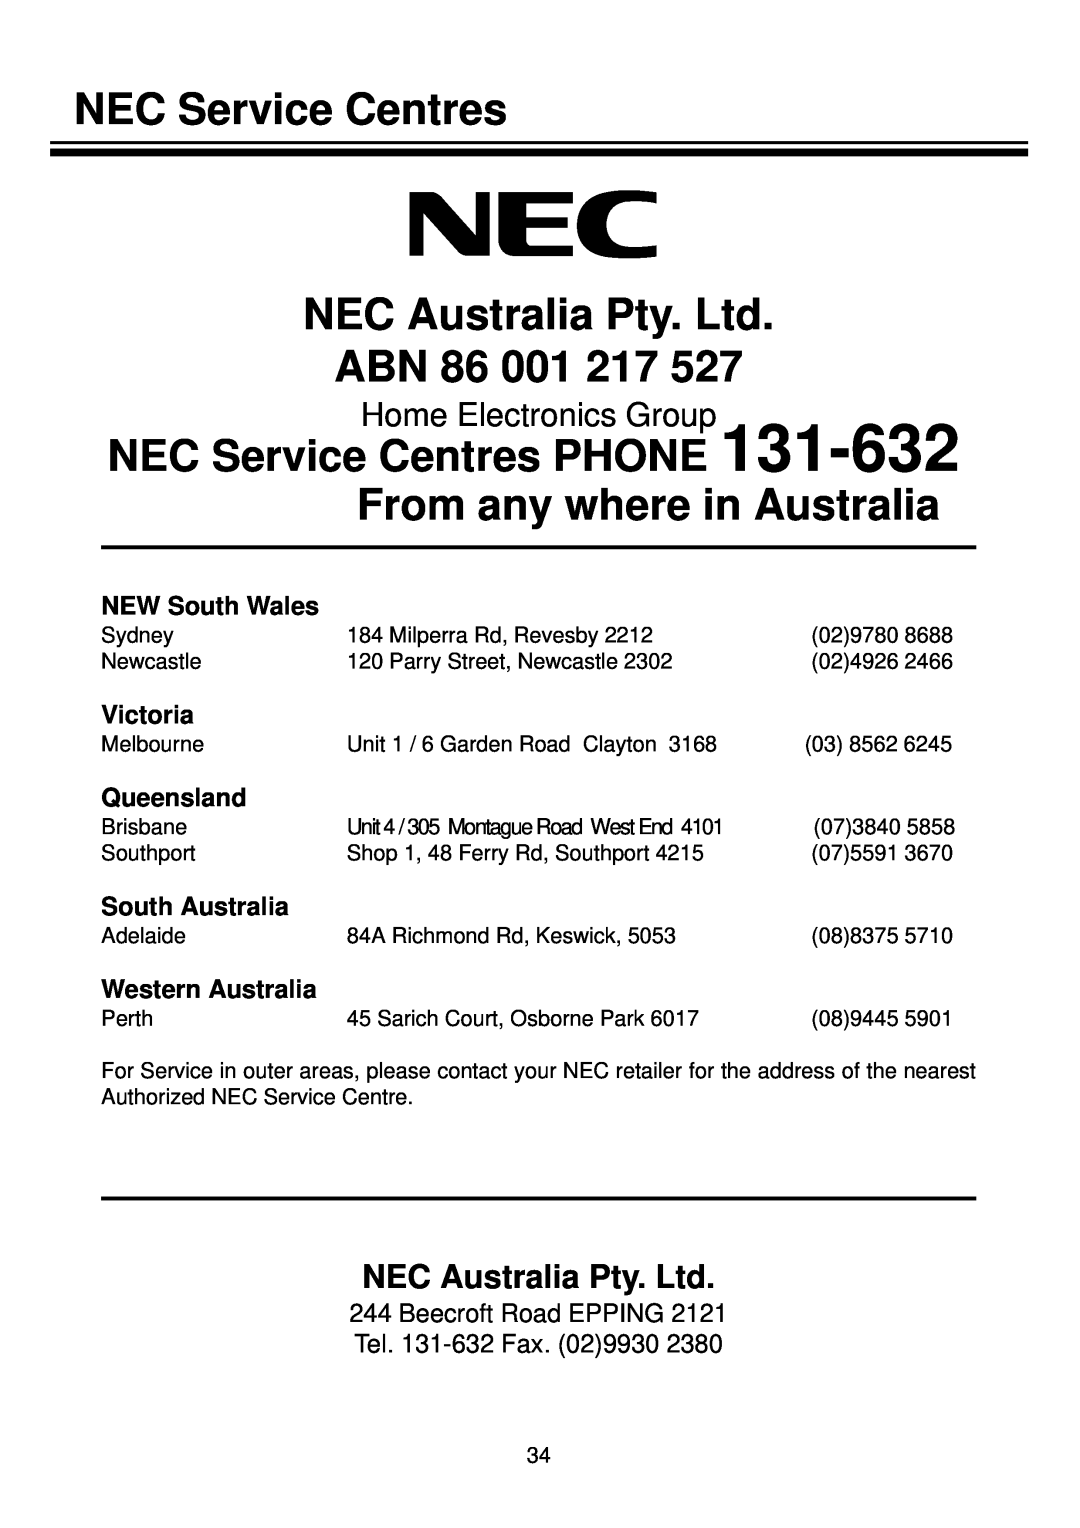 NEC NDR50 ABN 86 001 217, NEC Service Centres PHONE 131-632 From any where in Australia, NEW South Wales, Victoria 